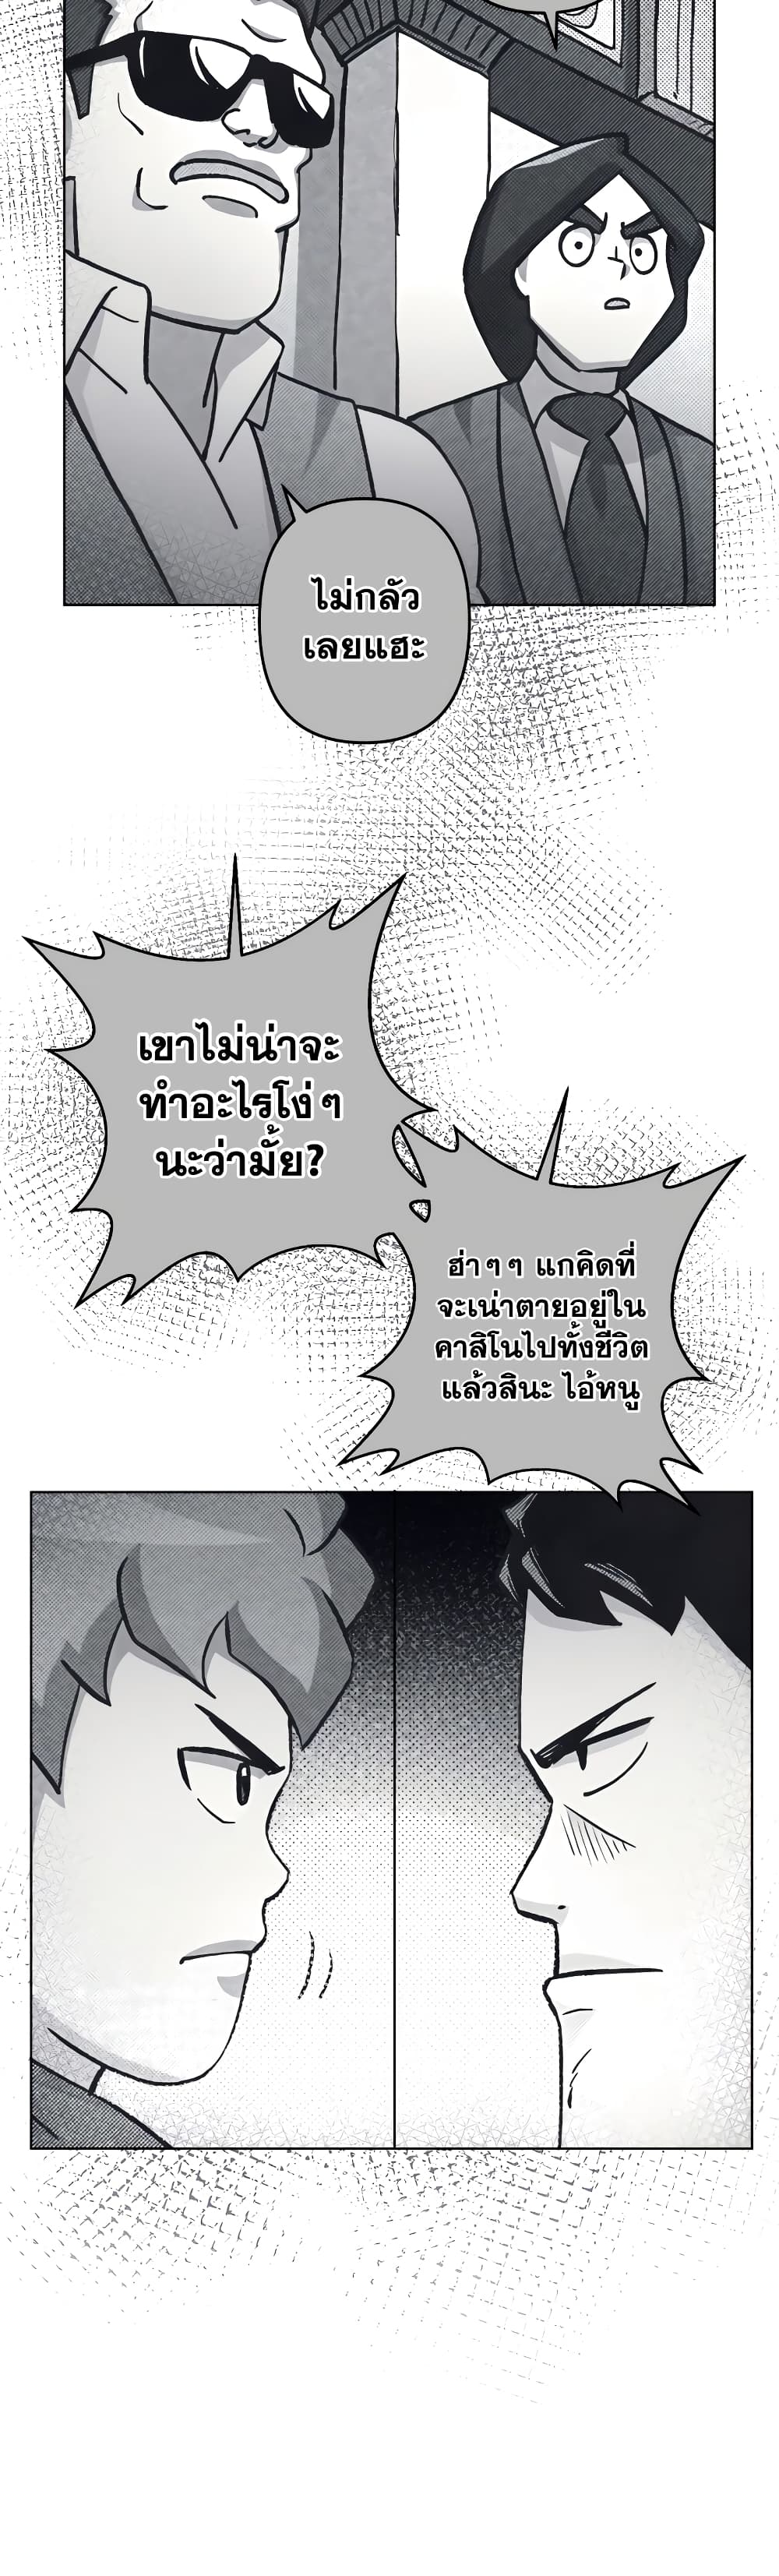 Surviving in an Action Manhwa ตอนที่ 15 (16)